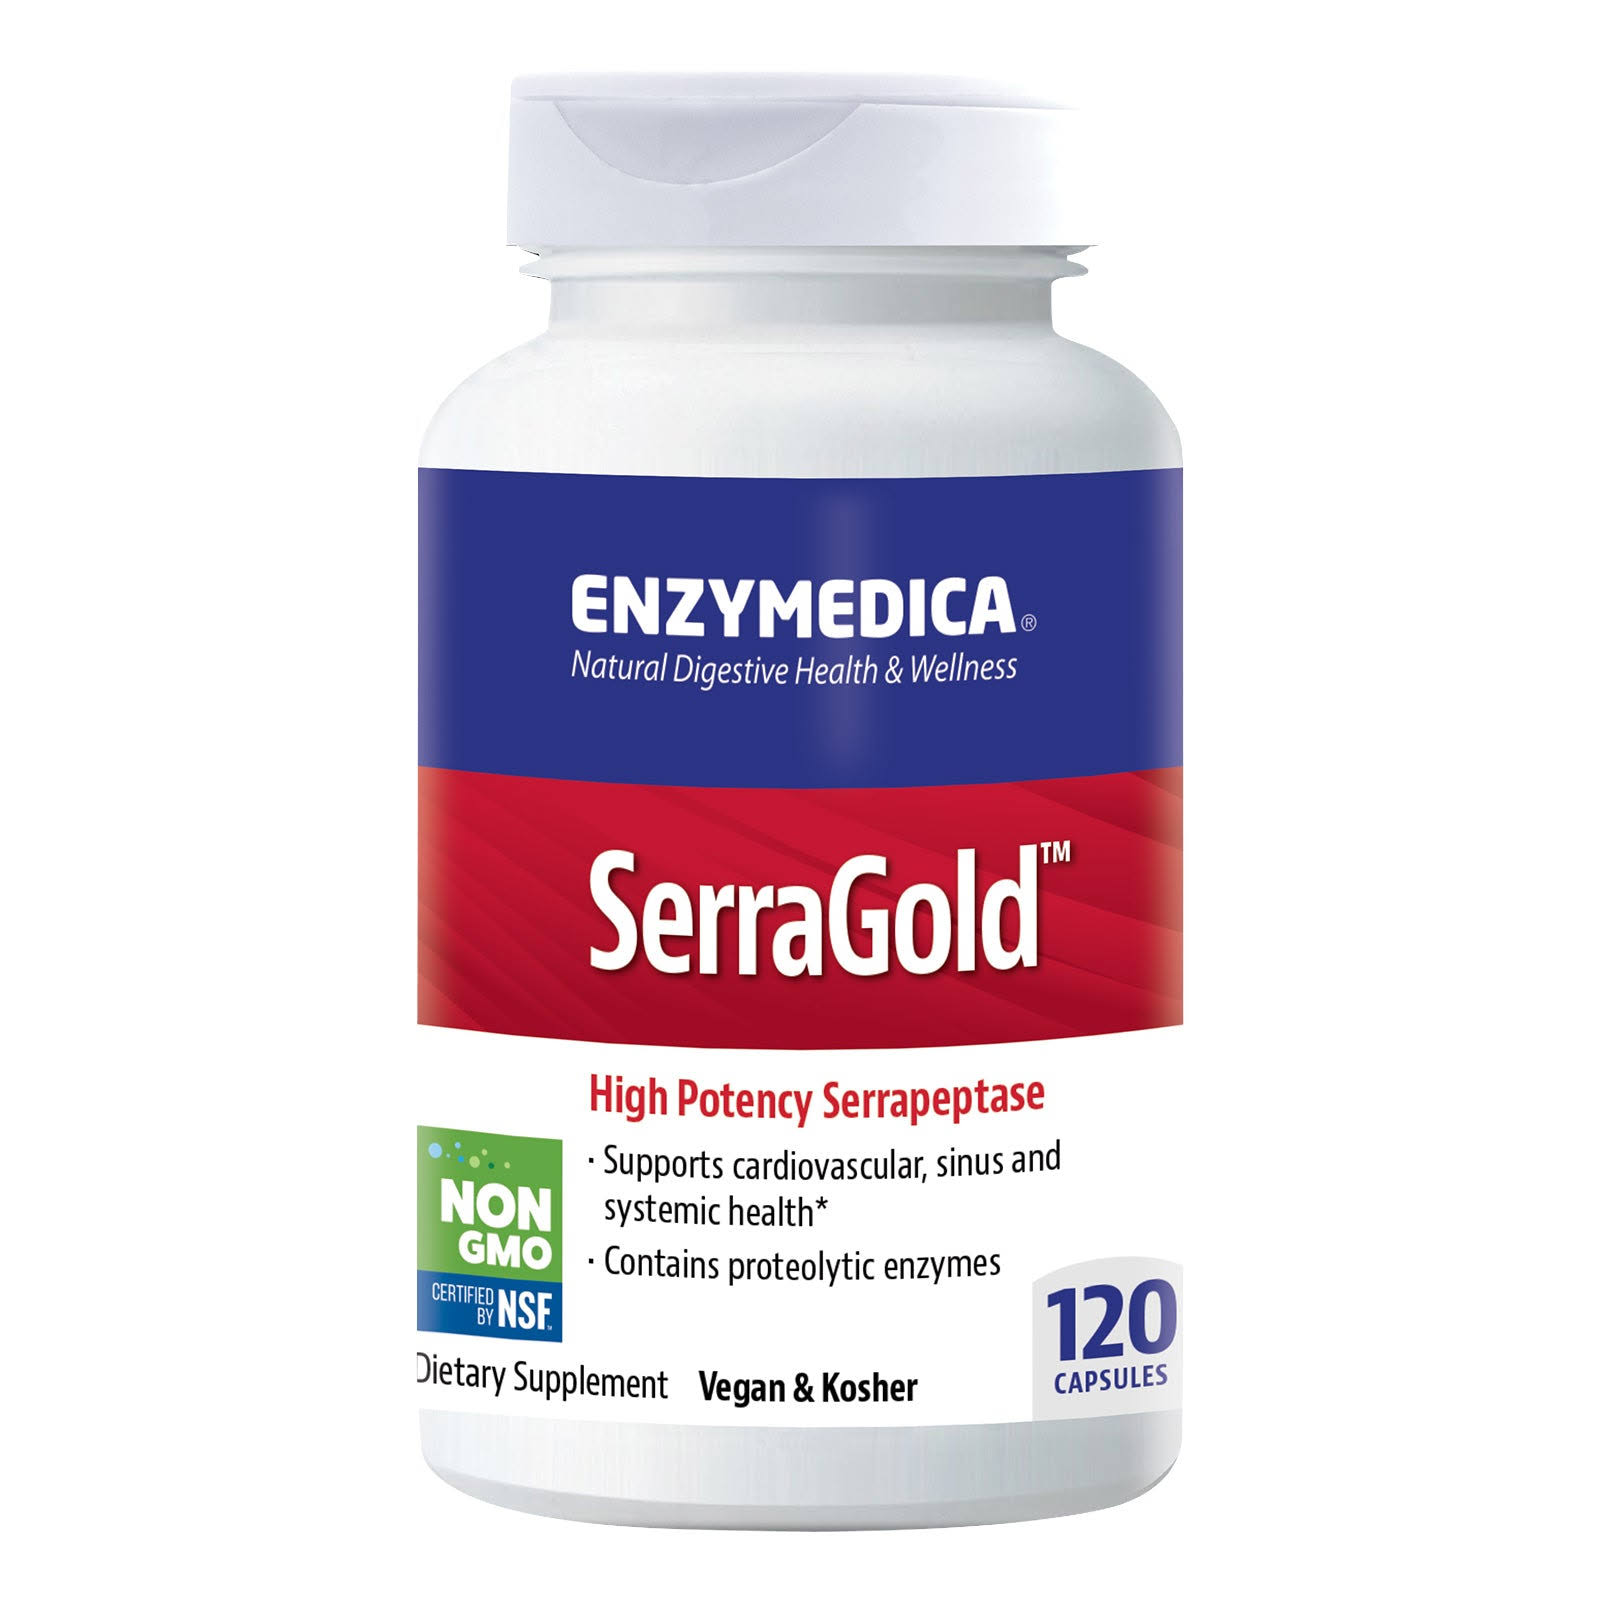 Enzymedica Serra Gold Cardiovascular Sinus and Systemic Health Body Dietary Supplement - 120 Capsules